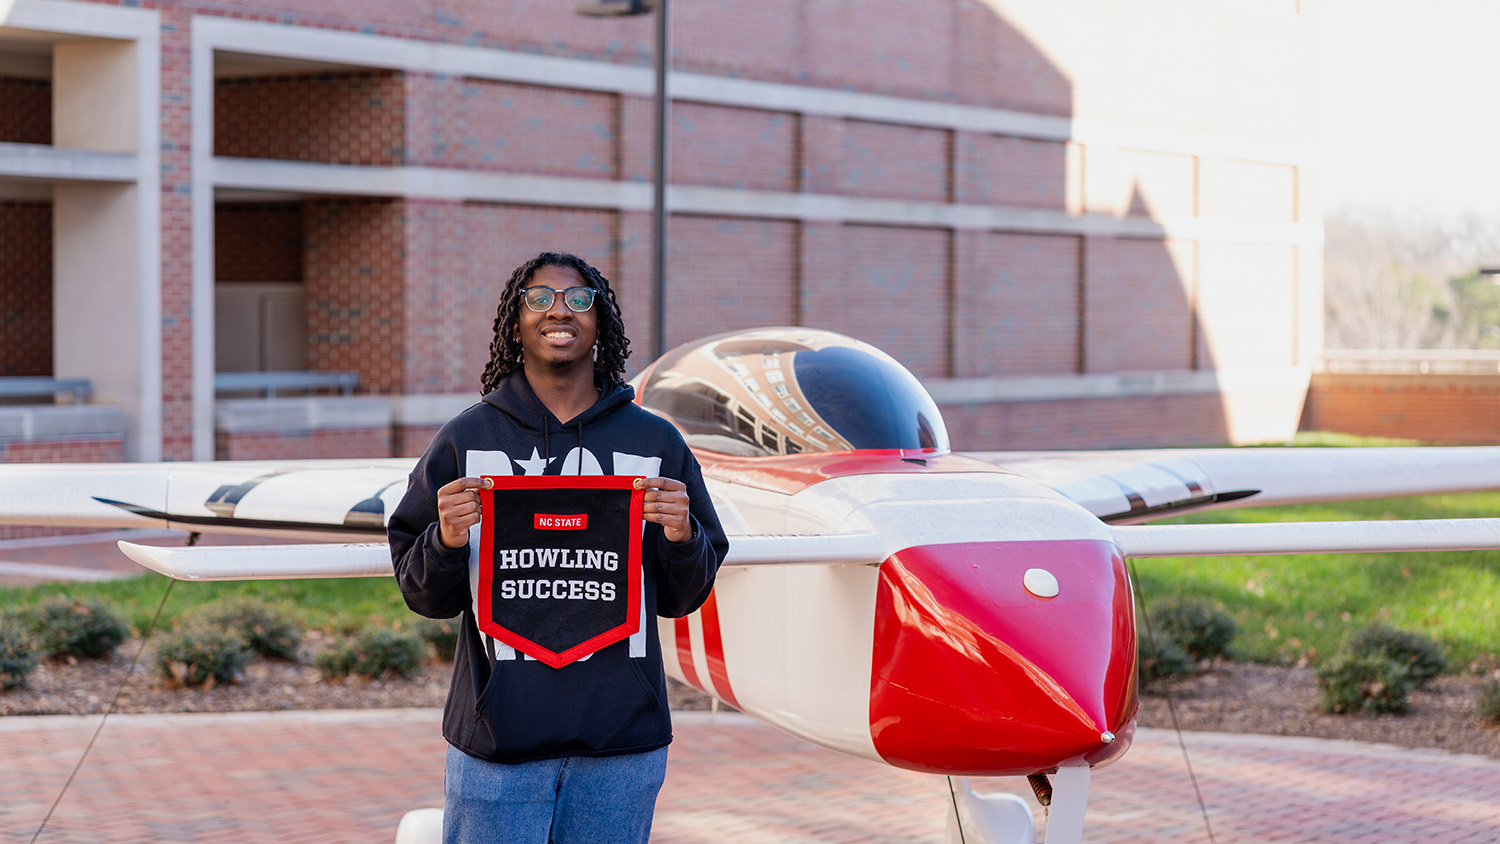 Caston Reaves poses with his Howling Success banner in front of a model plane outside Engineering Building III on Centennial Campus.